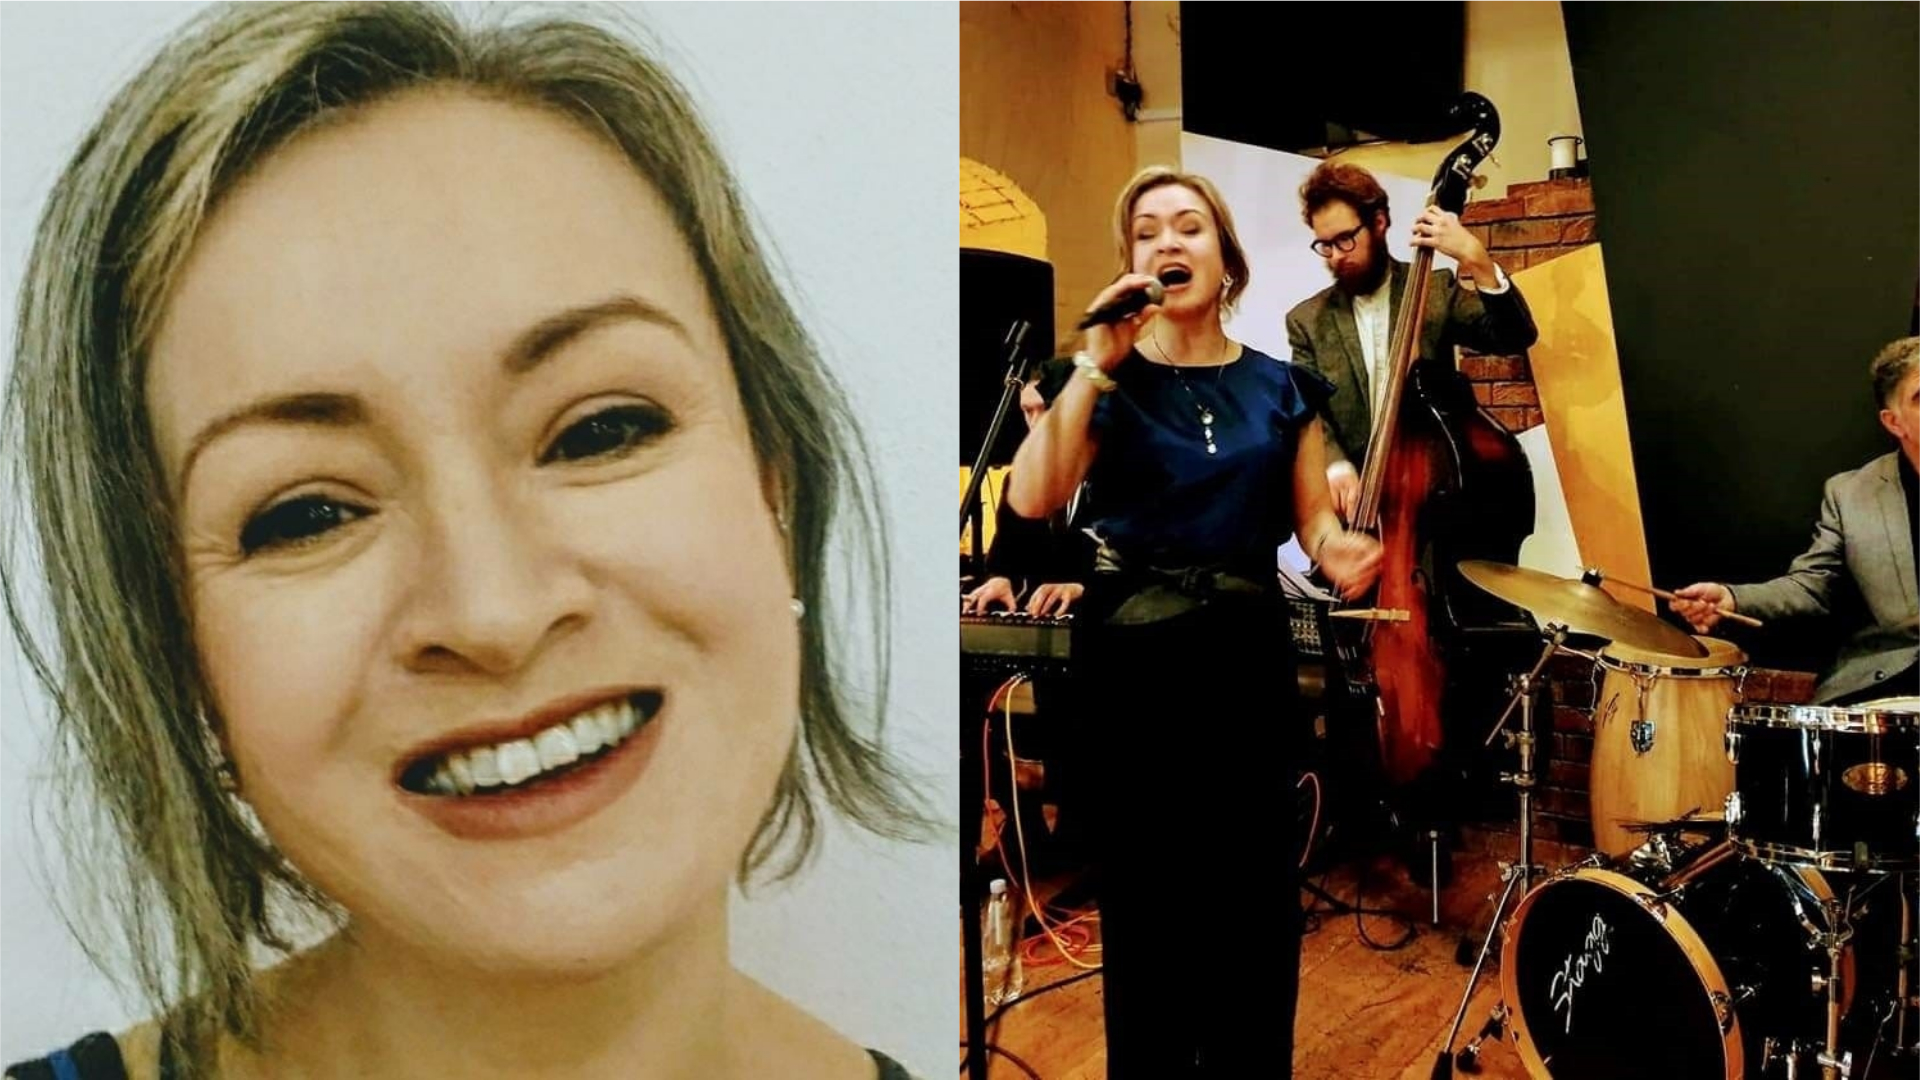 Pictures of Melissa Stott, a music and dance teacher living in Italy